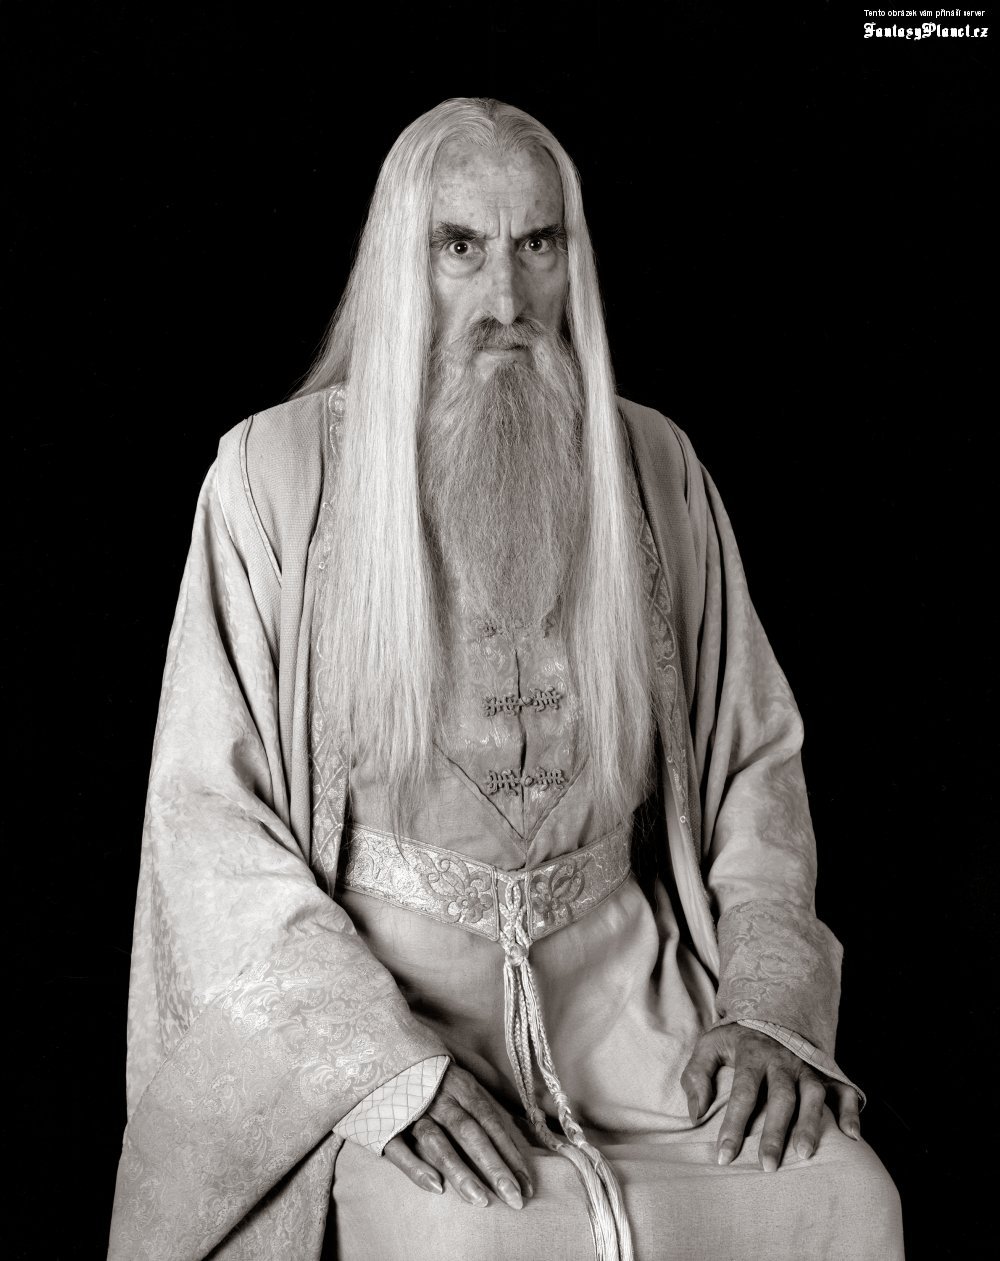 What Was Saruman's Ring? – Middle-earth & J.R.R. Tolkien Blog